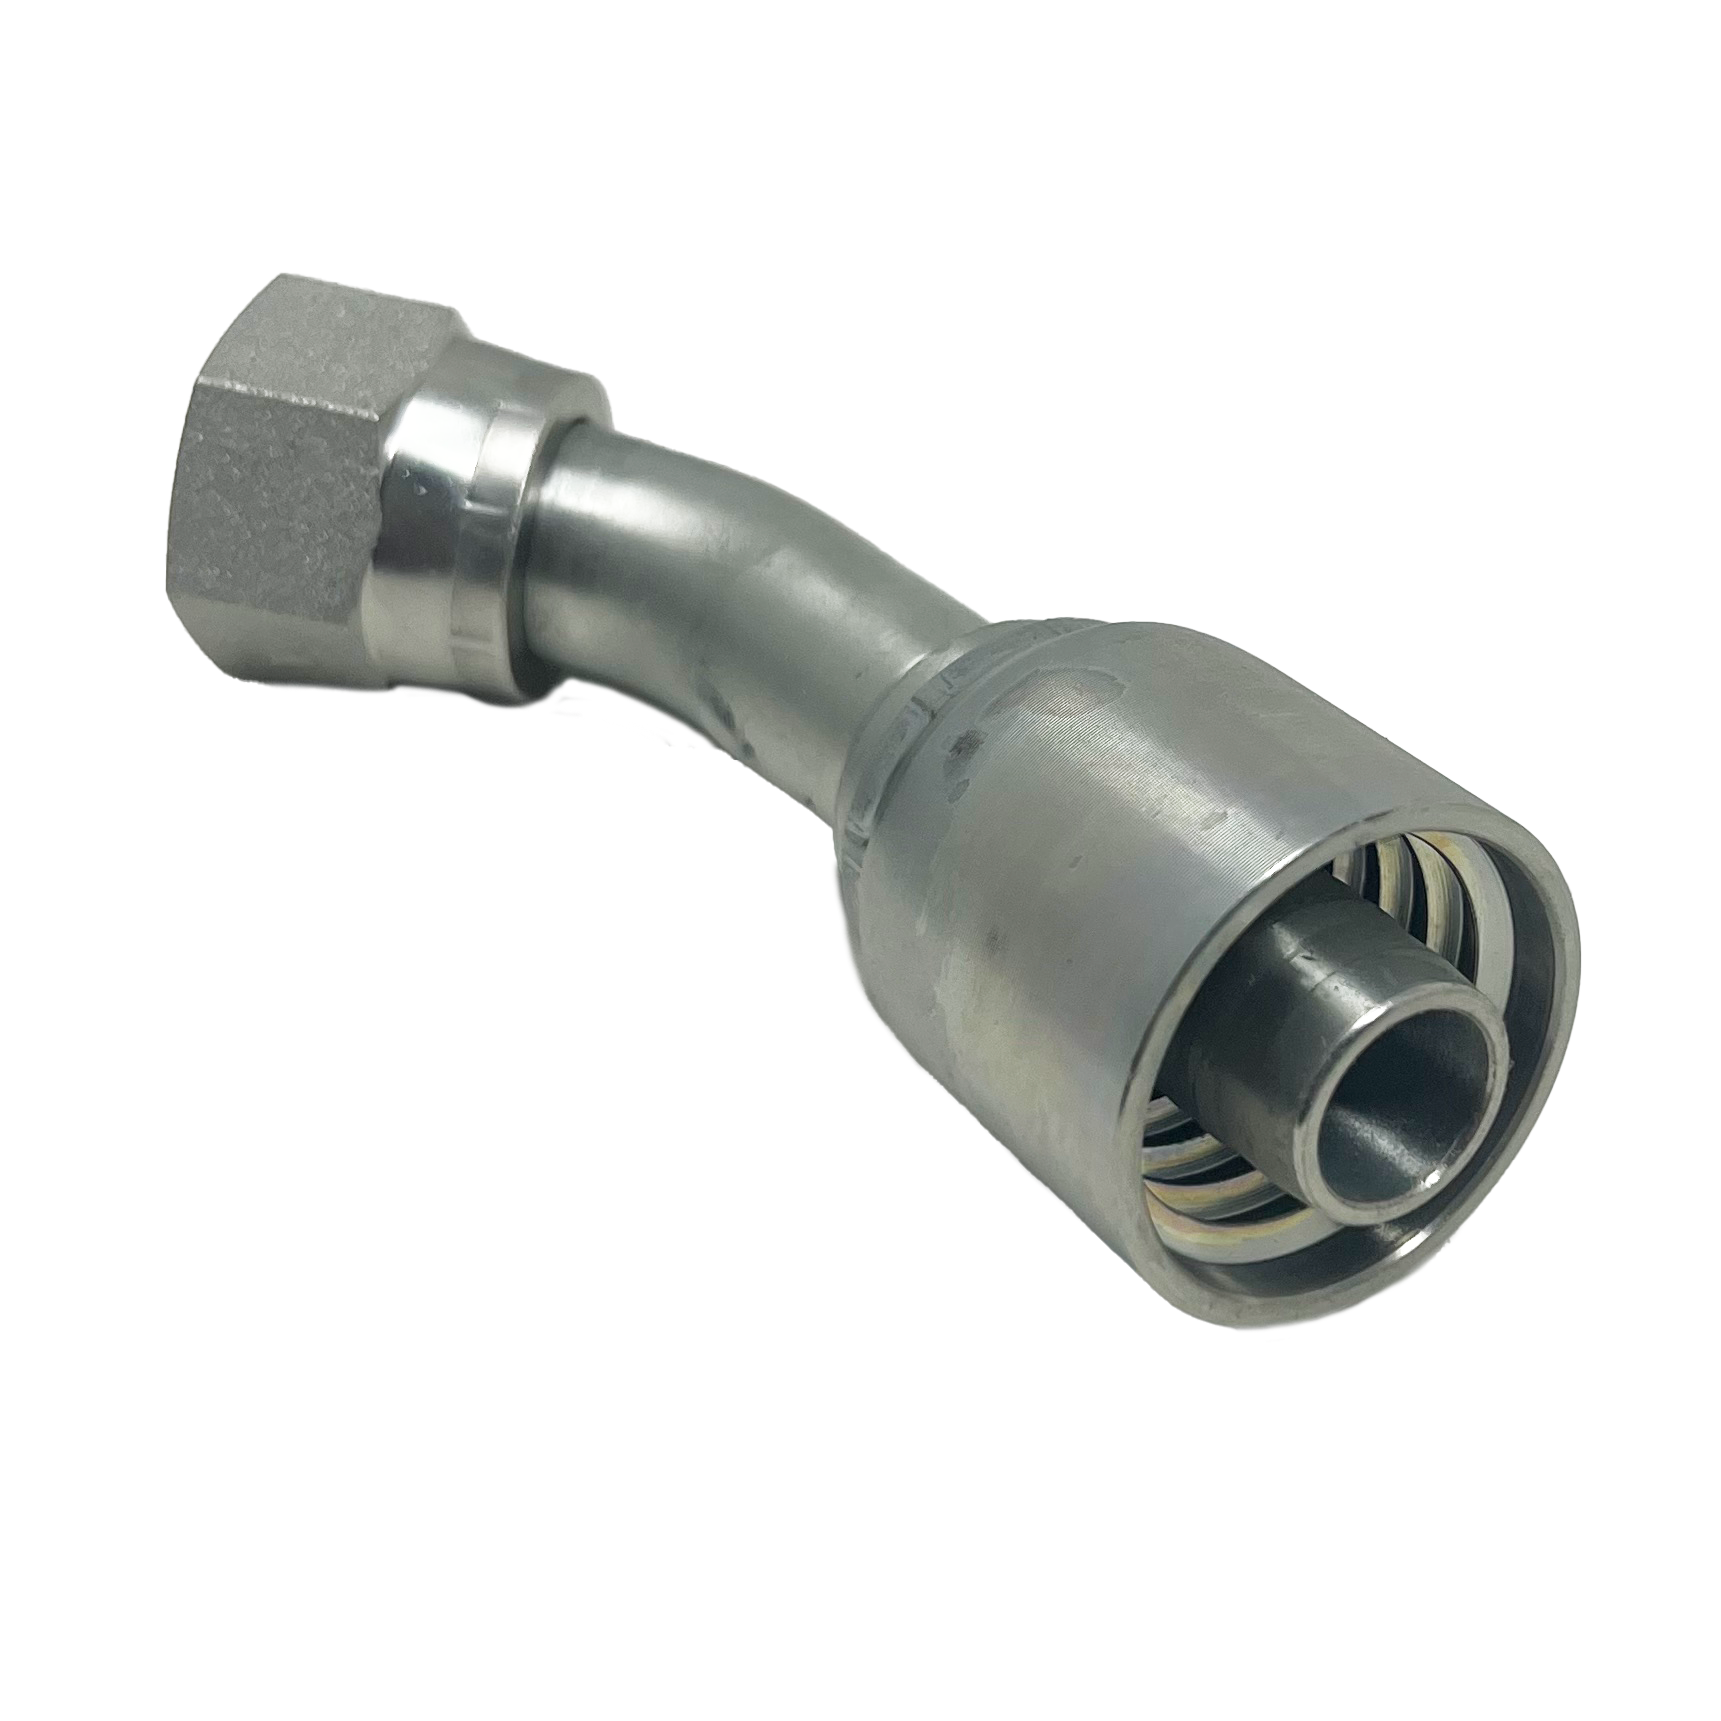 B2-JCFX45-0606: Continental Hose Fitting, 0.375 (3/8") Hose ID x 9/16-18 Female JIC, 45-Degree Swivel Connection